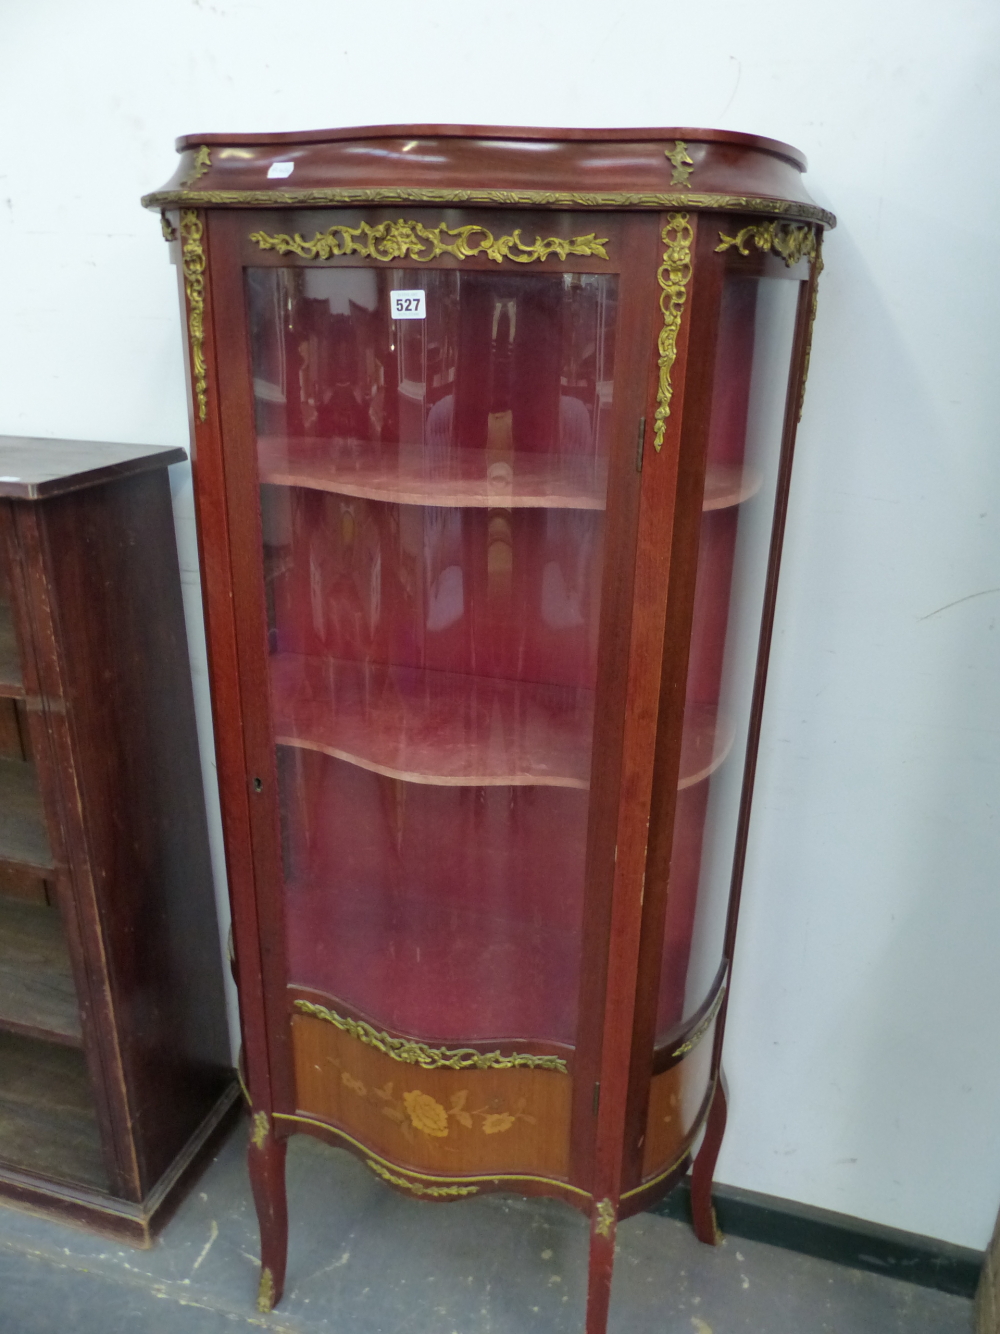 A 20th C. FRENCH MAHOGANY DISPLAY CABINET, ORMOLU MOUNTED ABOUT THE SERPENTINE GLAZED DOOR ENCLOSING